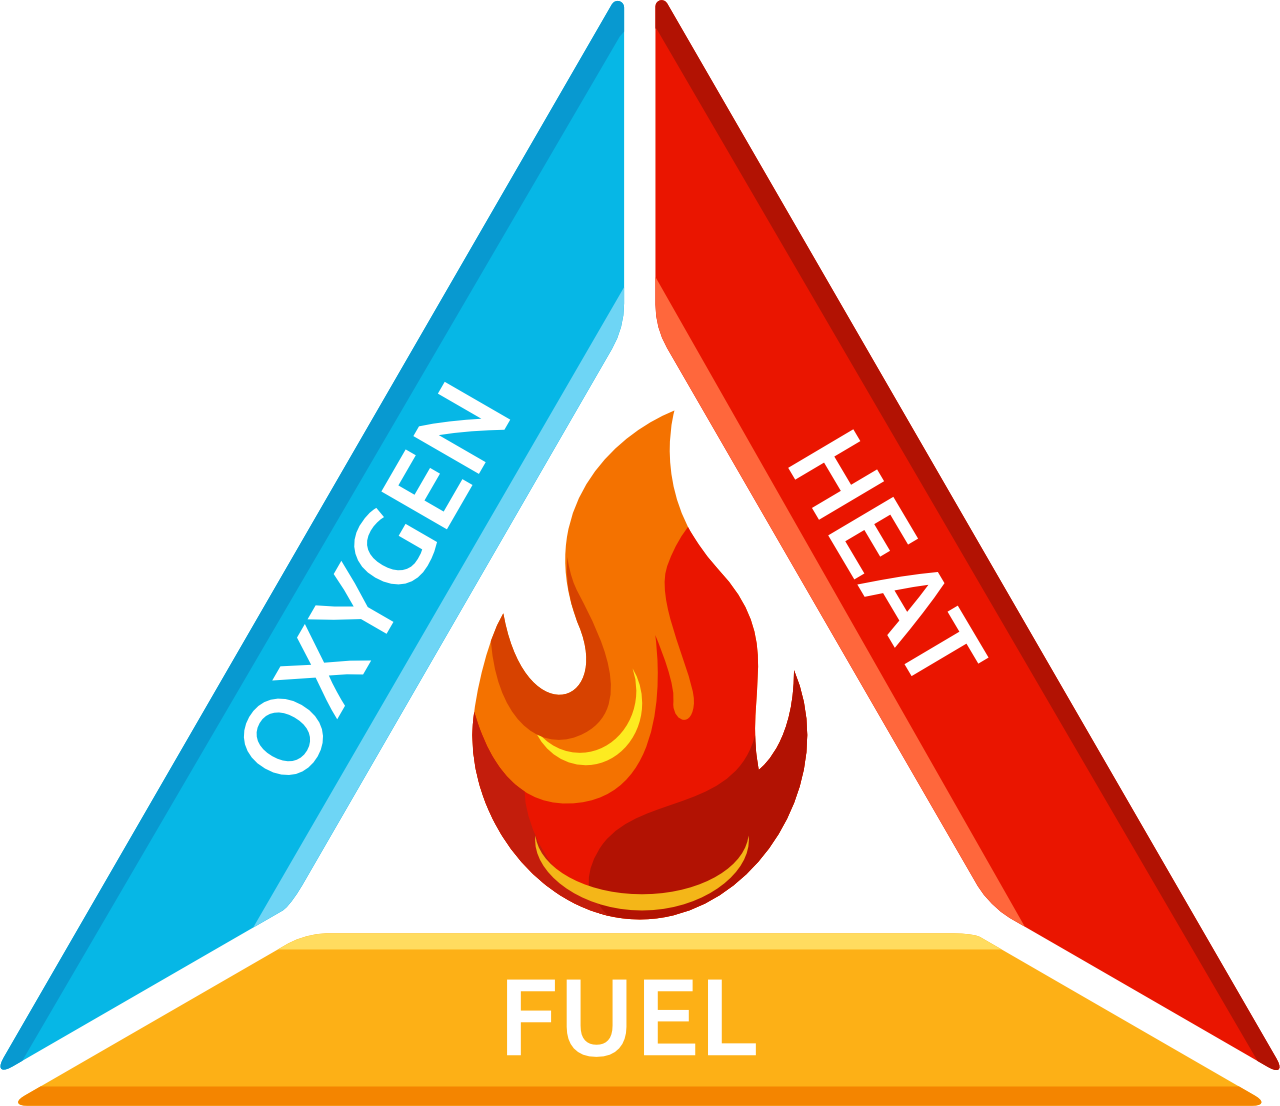 fire triangle showing the elements of the fire triangle - oxygen heat fuel - infographic